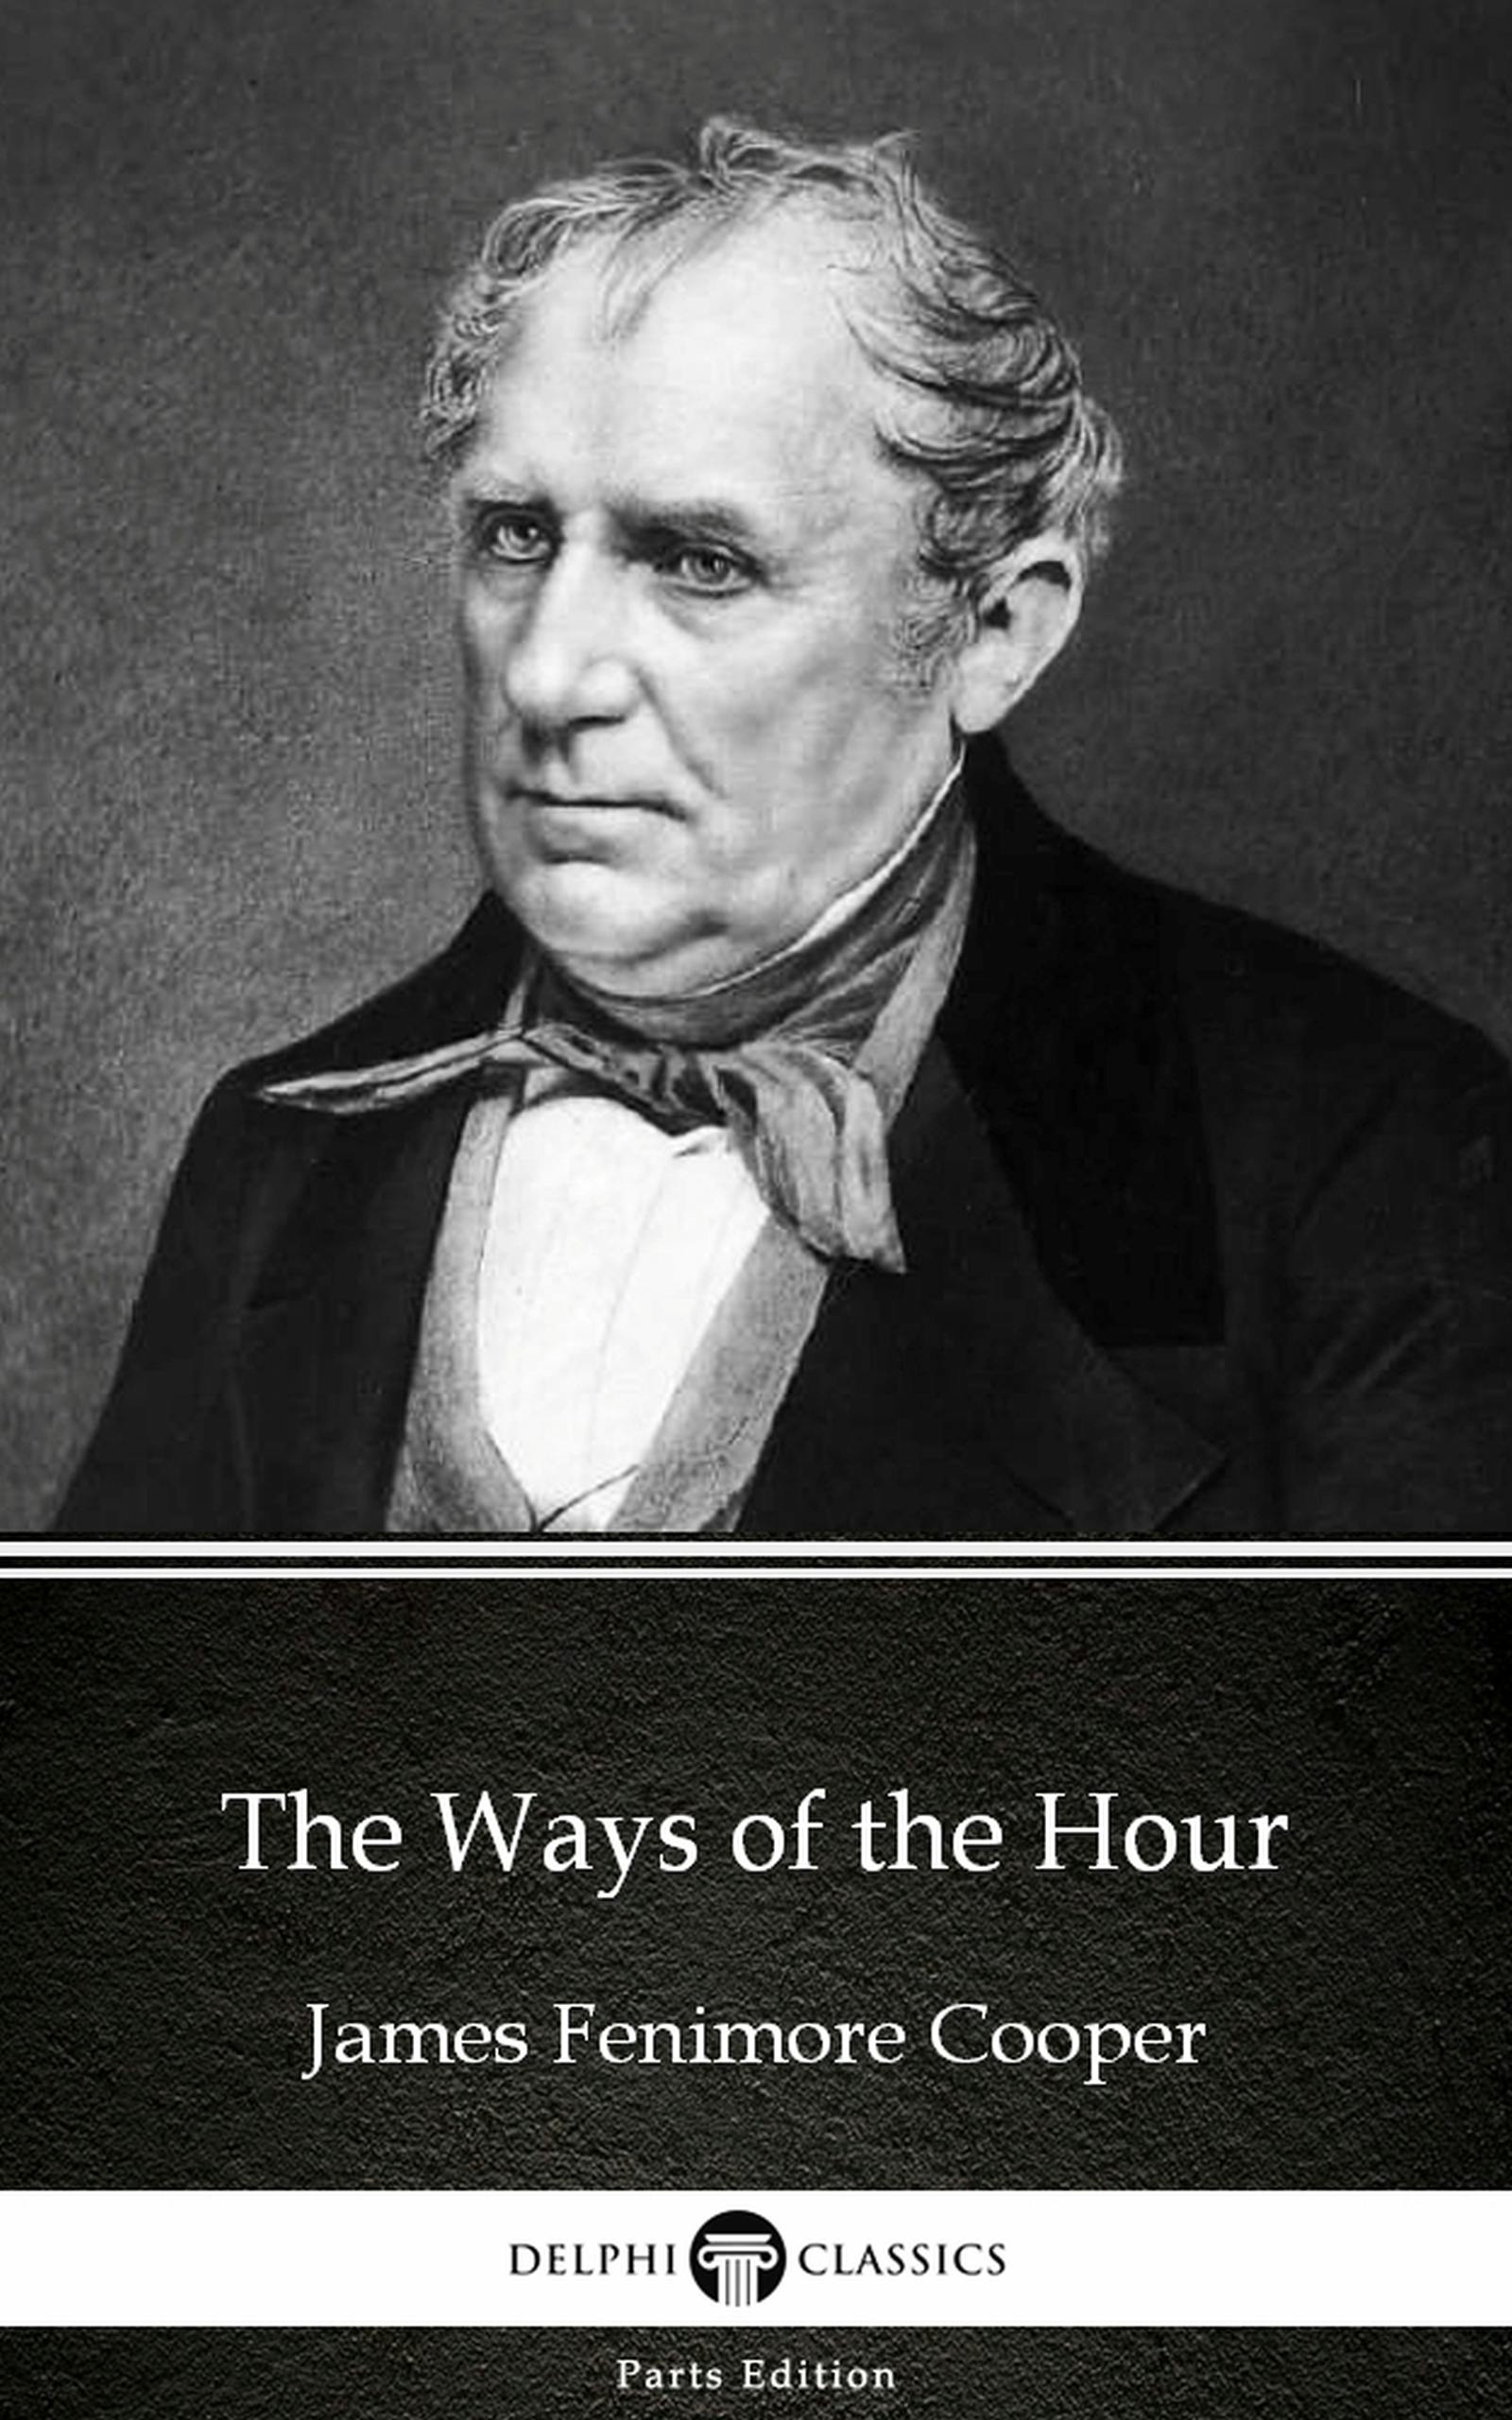 The Ways of the Hour by James Fenimore Cooper - Delphi Classics (Illustrated) - James Fenimore Cooper